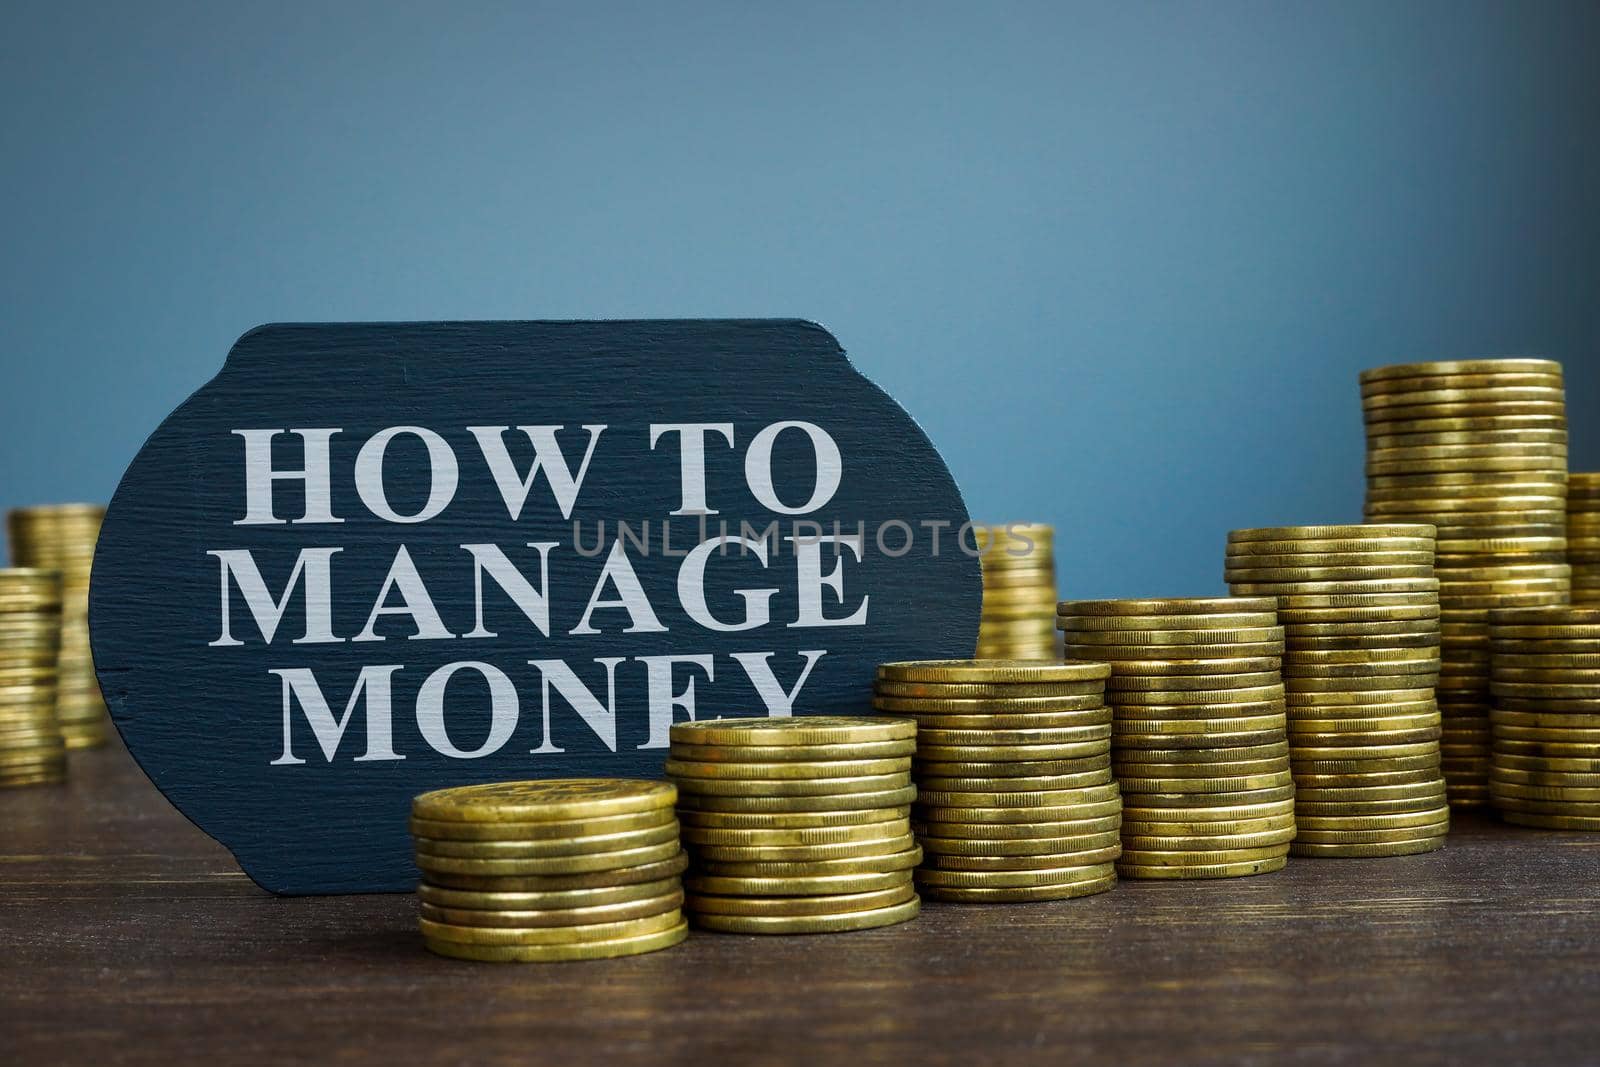 How to manage money on the plate and cash.